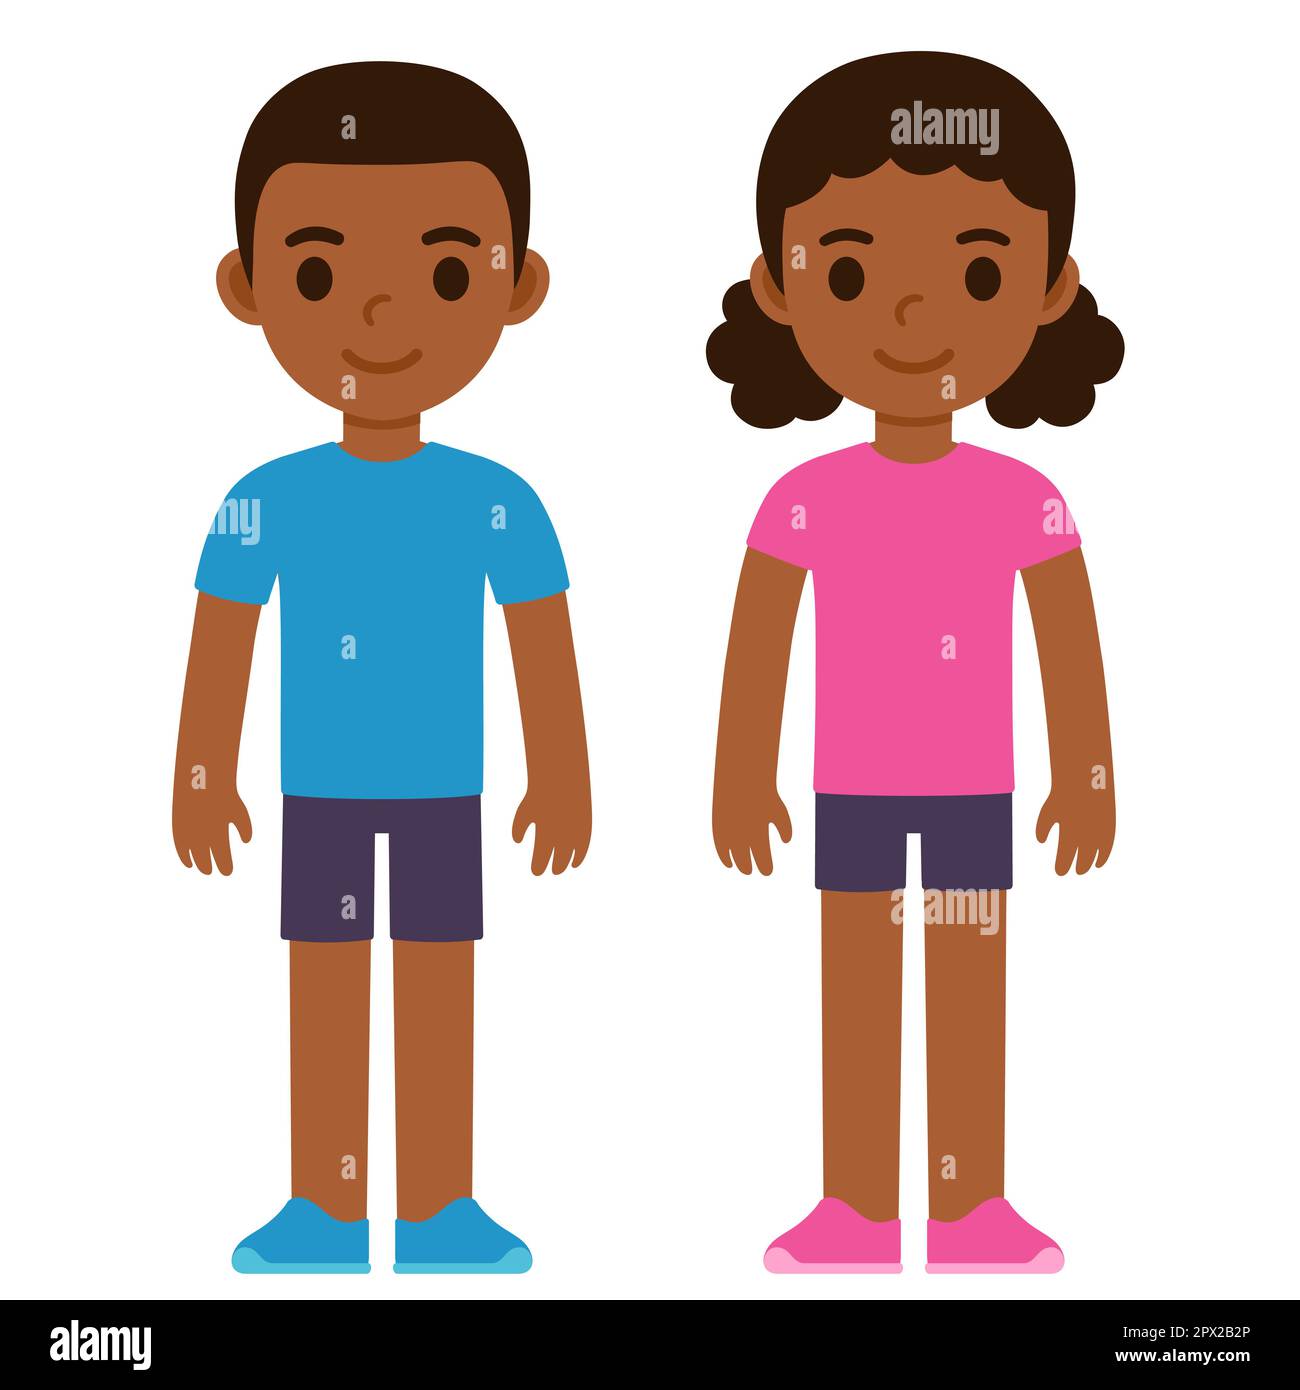 Cute cartoon Black boy in blue shirt and girl in pink shirt. Children in traditional gender clothes color. Simple flat vector illustration. Stock Vector